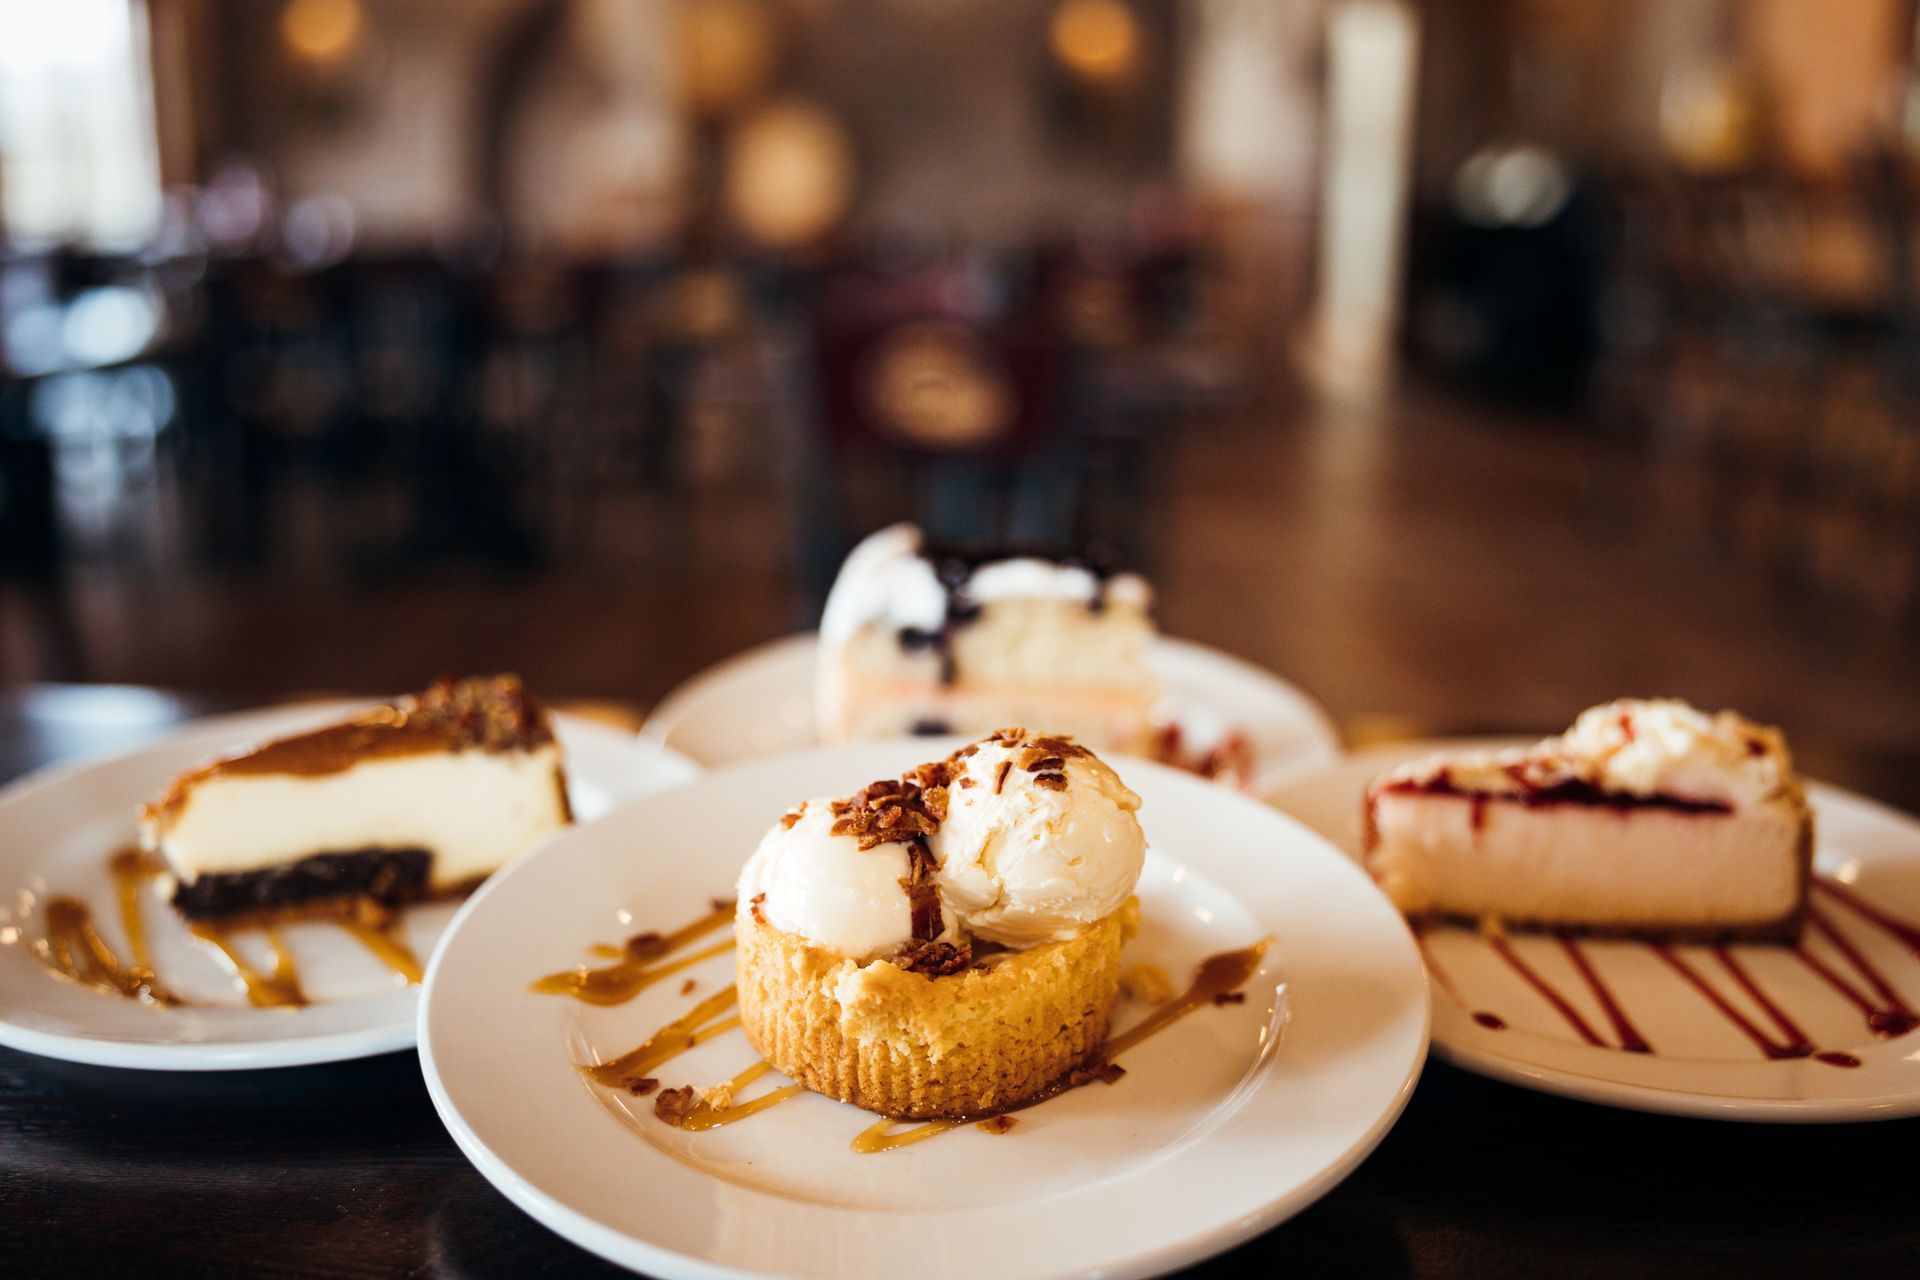 Pair Your Delicious Dessert With Ice Cream for an Extra Sweet Touch at the Hill in Holts Summit, MO.